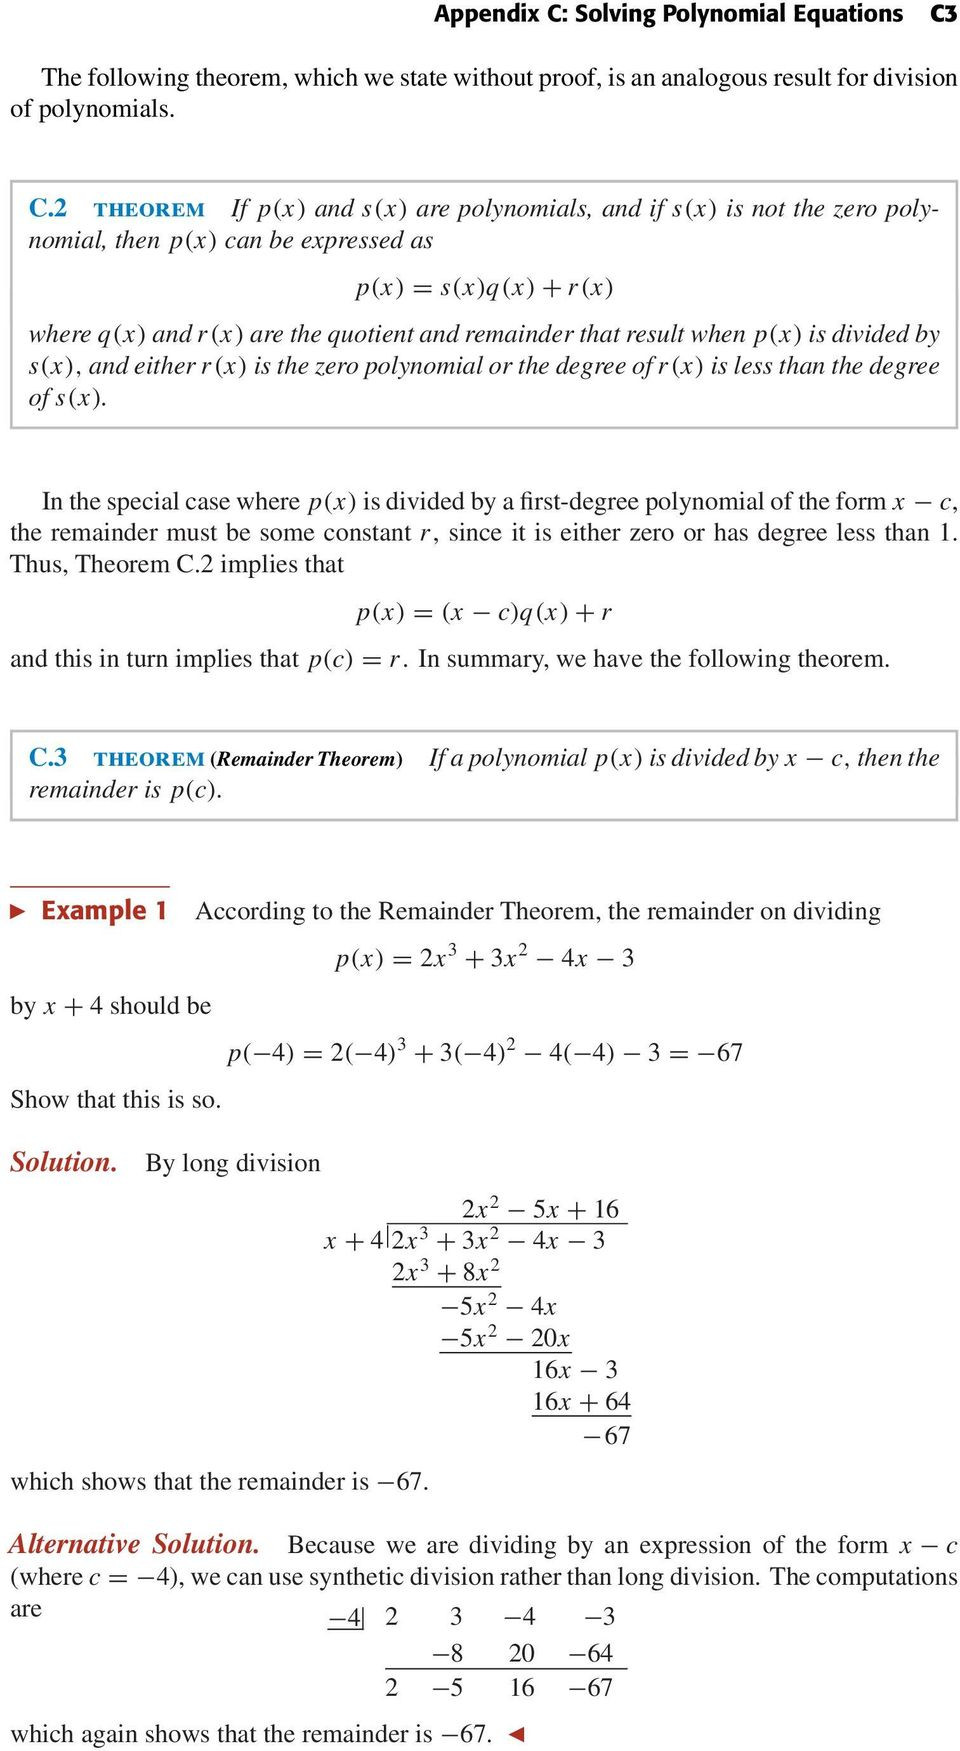 Solving Polynomial Equations Worksheet Answers solving Polynomial Equations Pdf Free Download